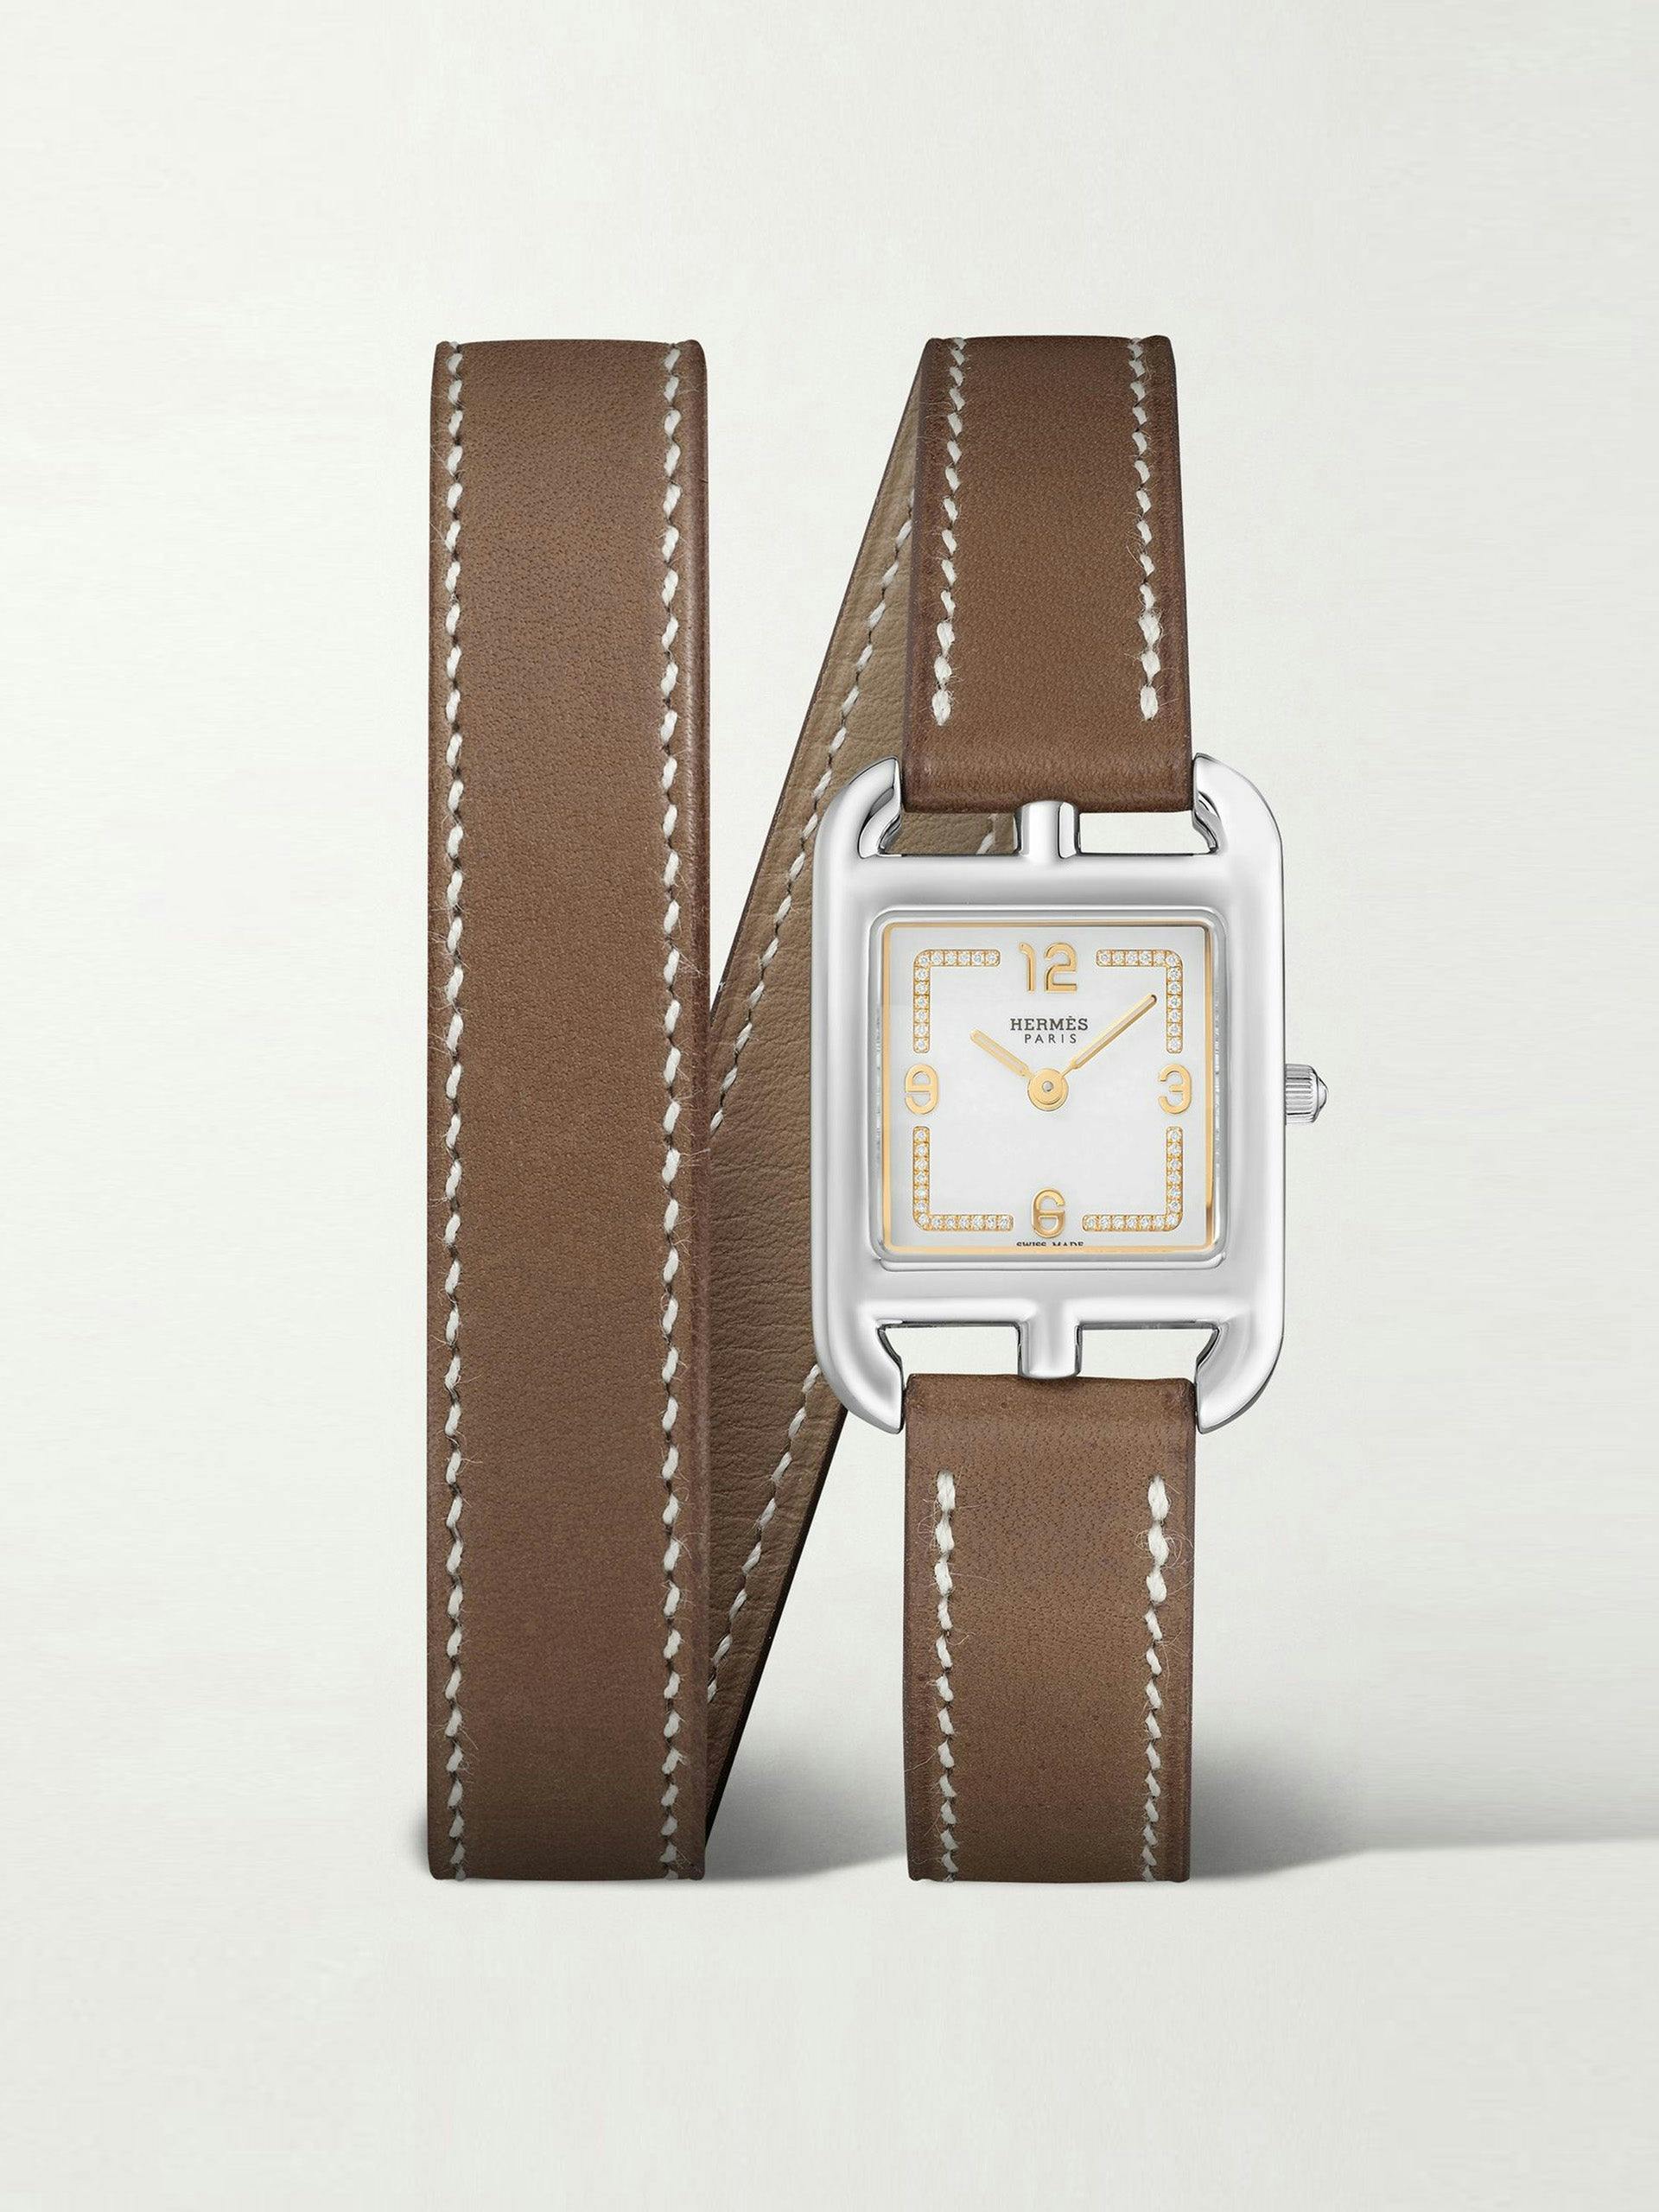 Stainless steel, leather and diamond watch